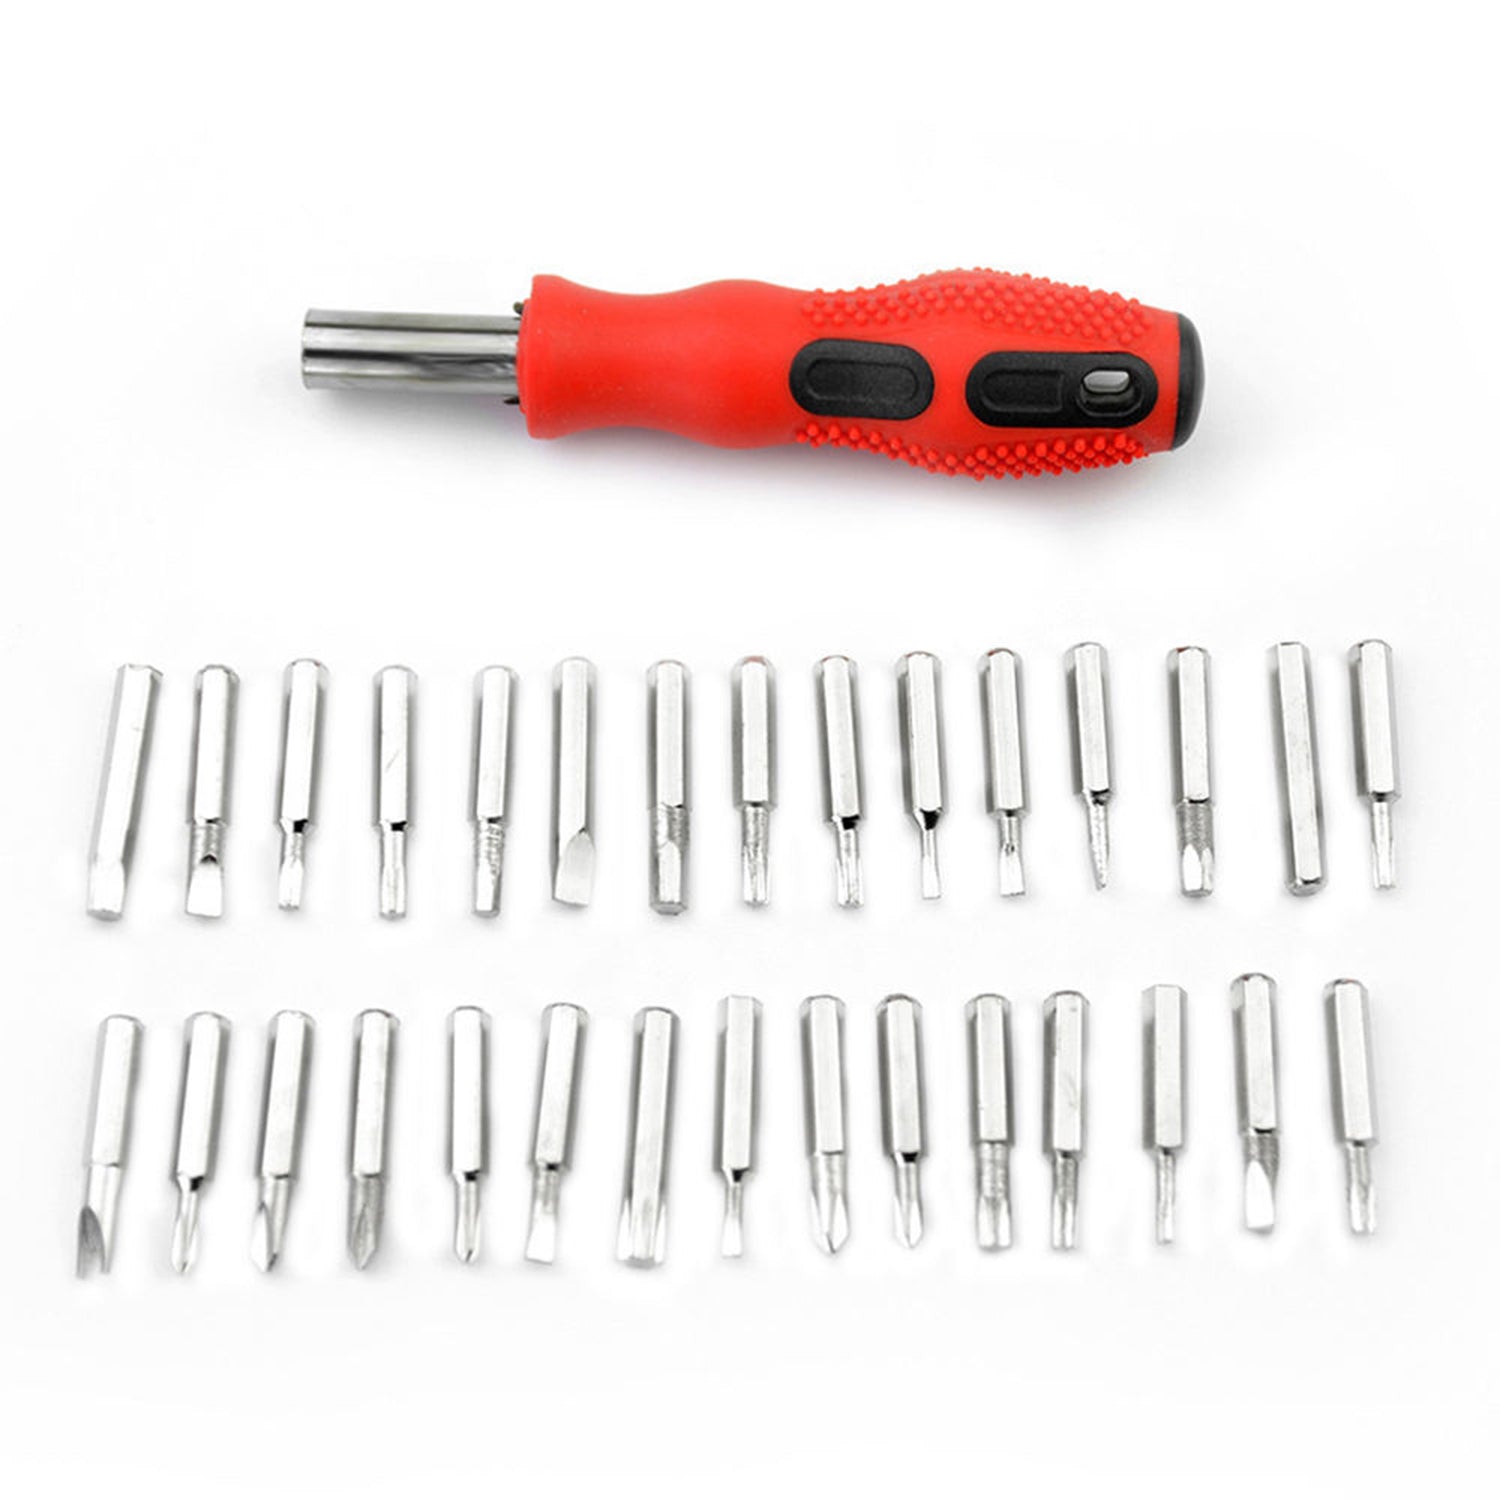 9110 (SET OF 4PC) SCREWDRIVER SET, STEEL 31 IN 1 WITH 30 SCREWDRIVER BITS, PROFESSIONAL MAGNETIC DRIVER SET